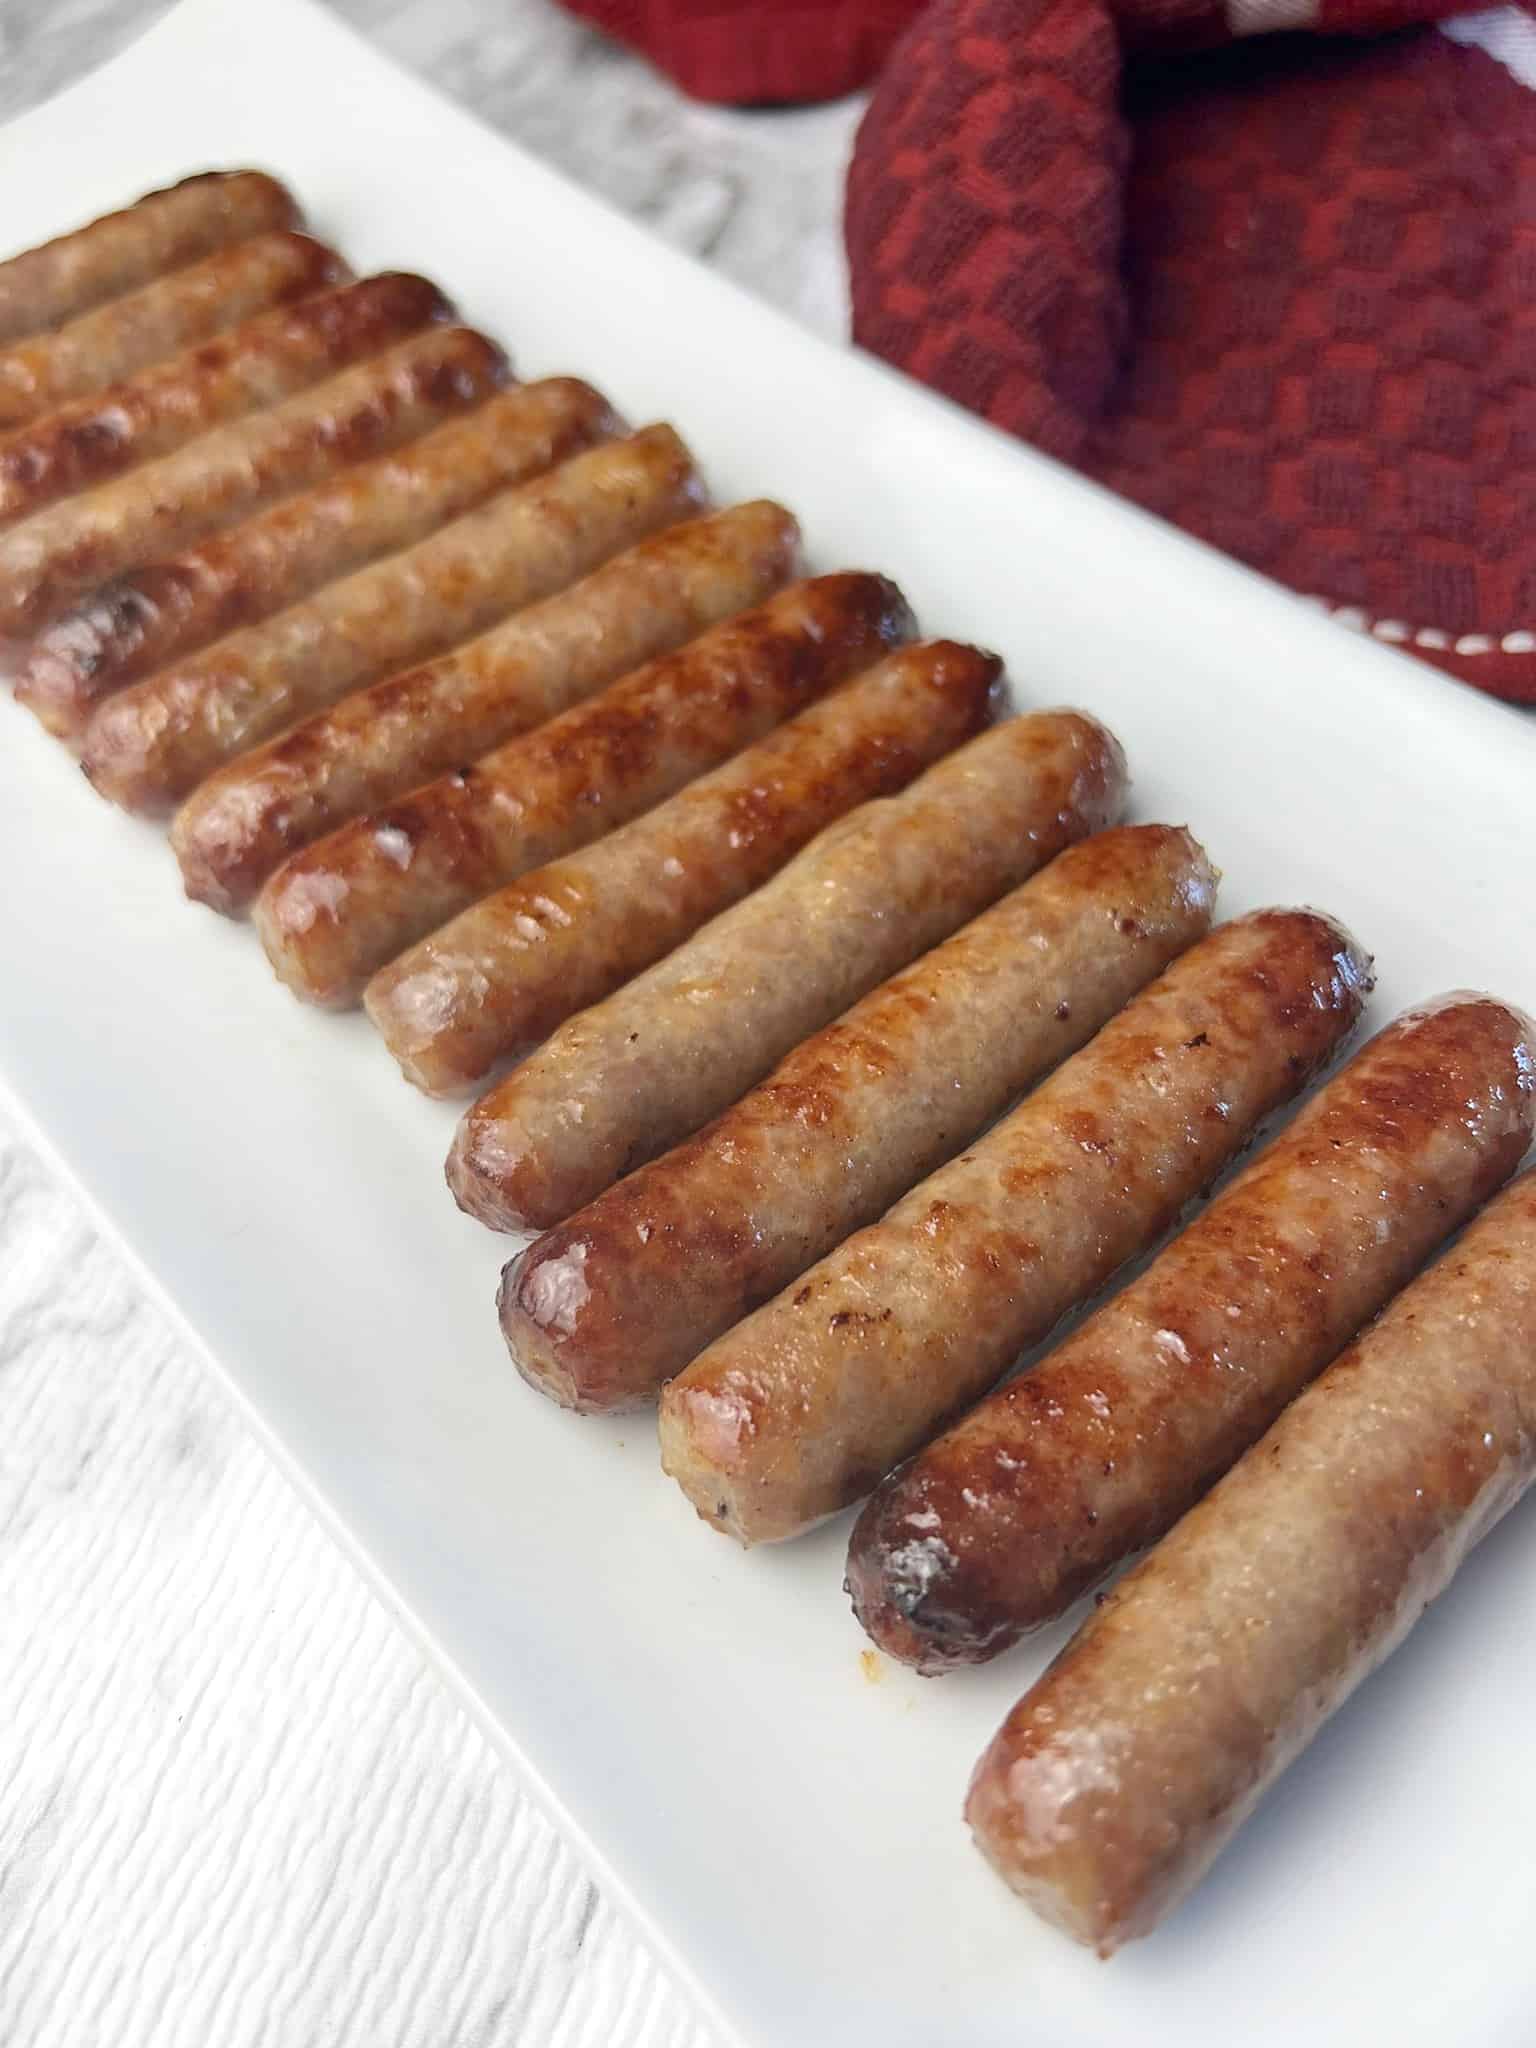 breakfast sausages served on a white plate.